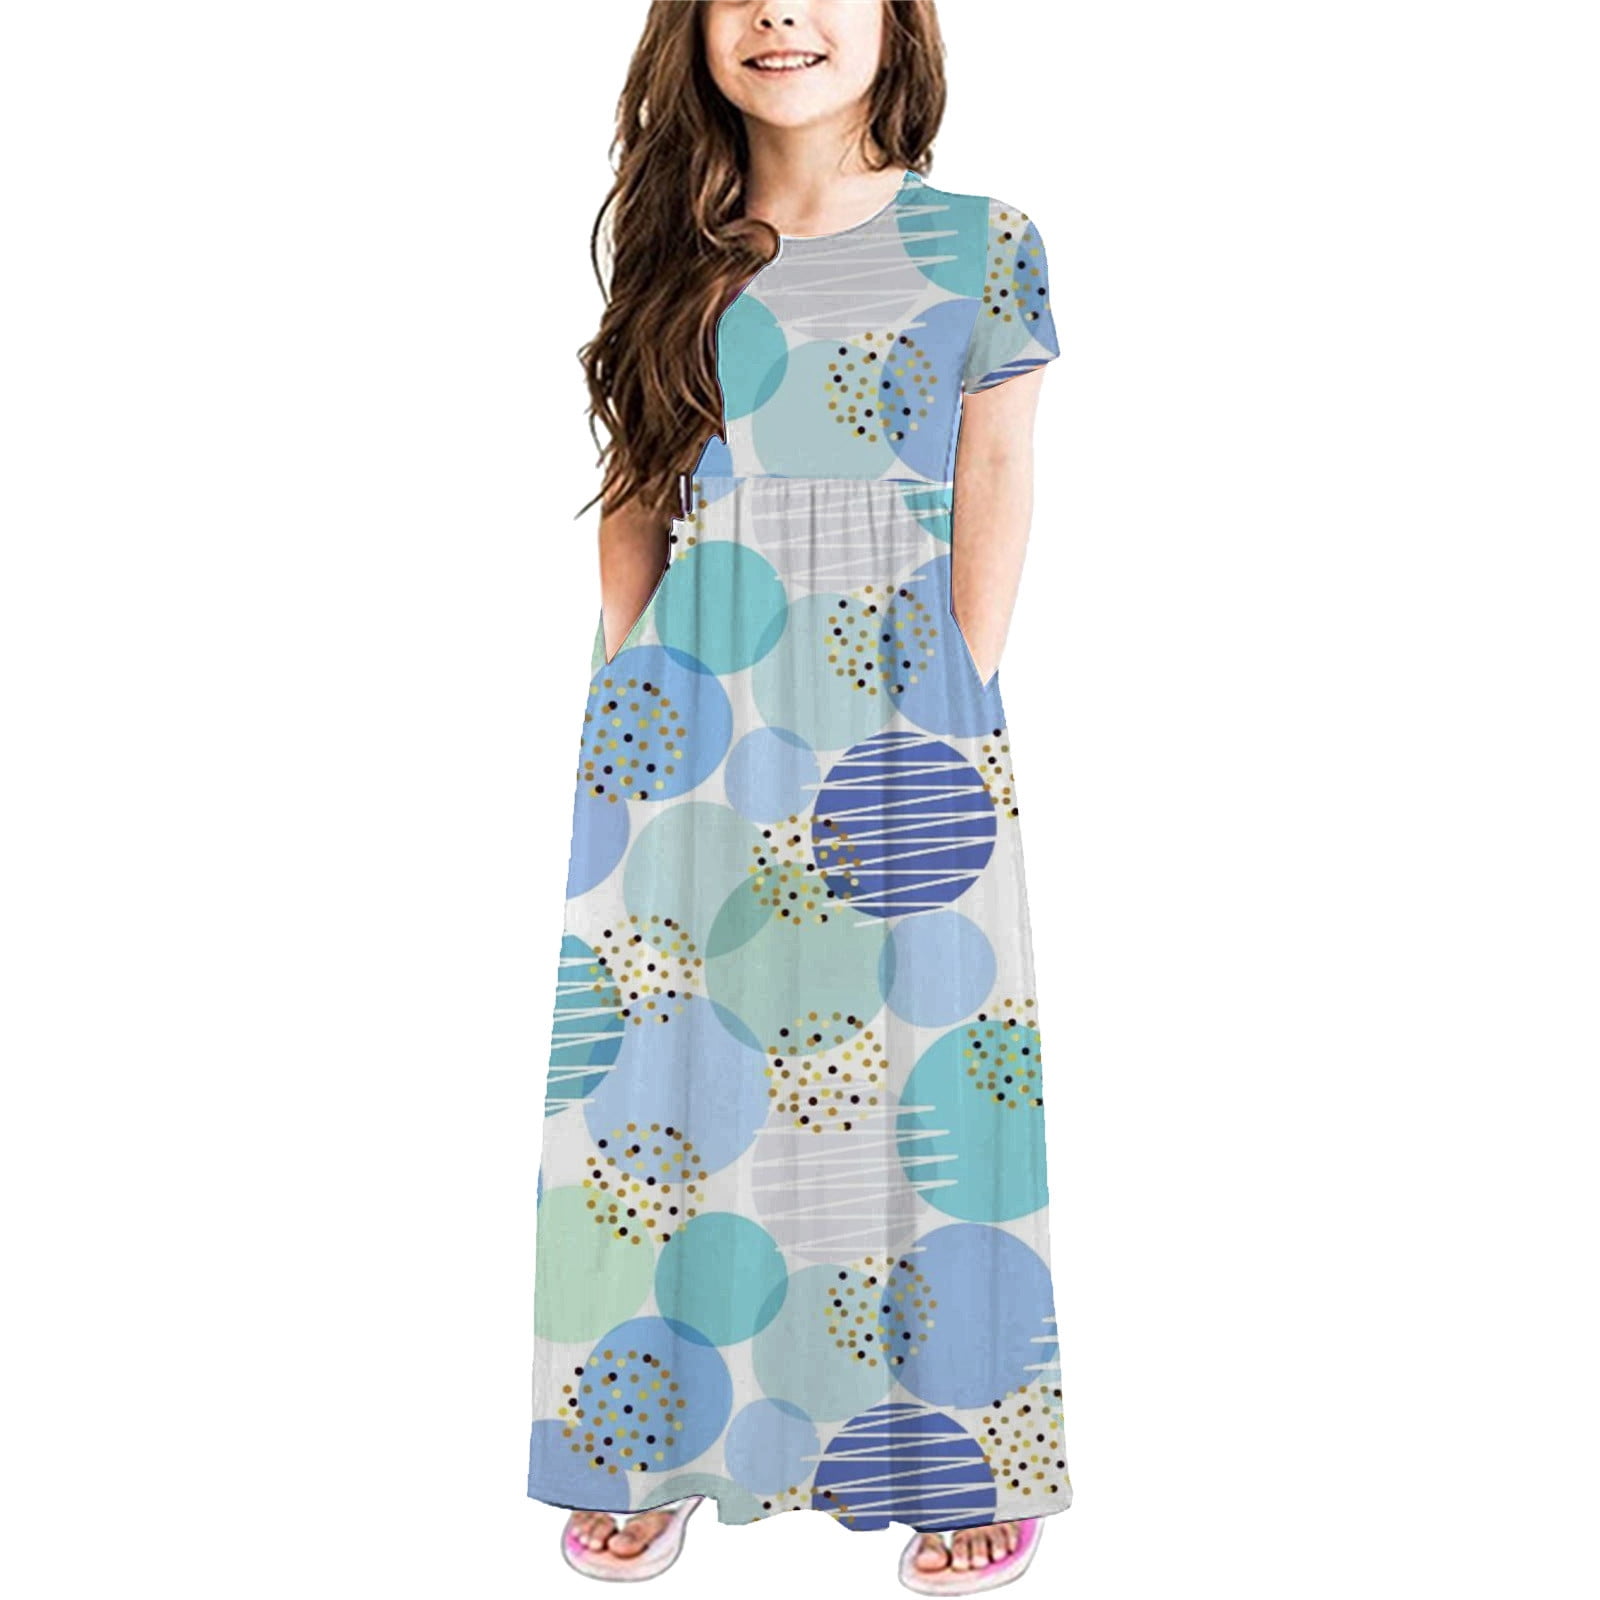 ZCFZJW Casual Girls Princess Dresses Cute Floral Printed Summer